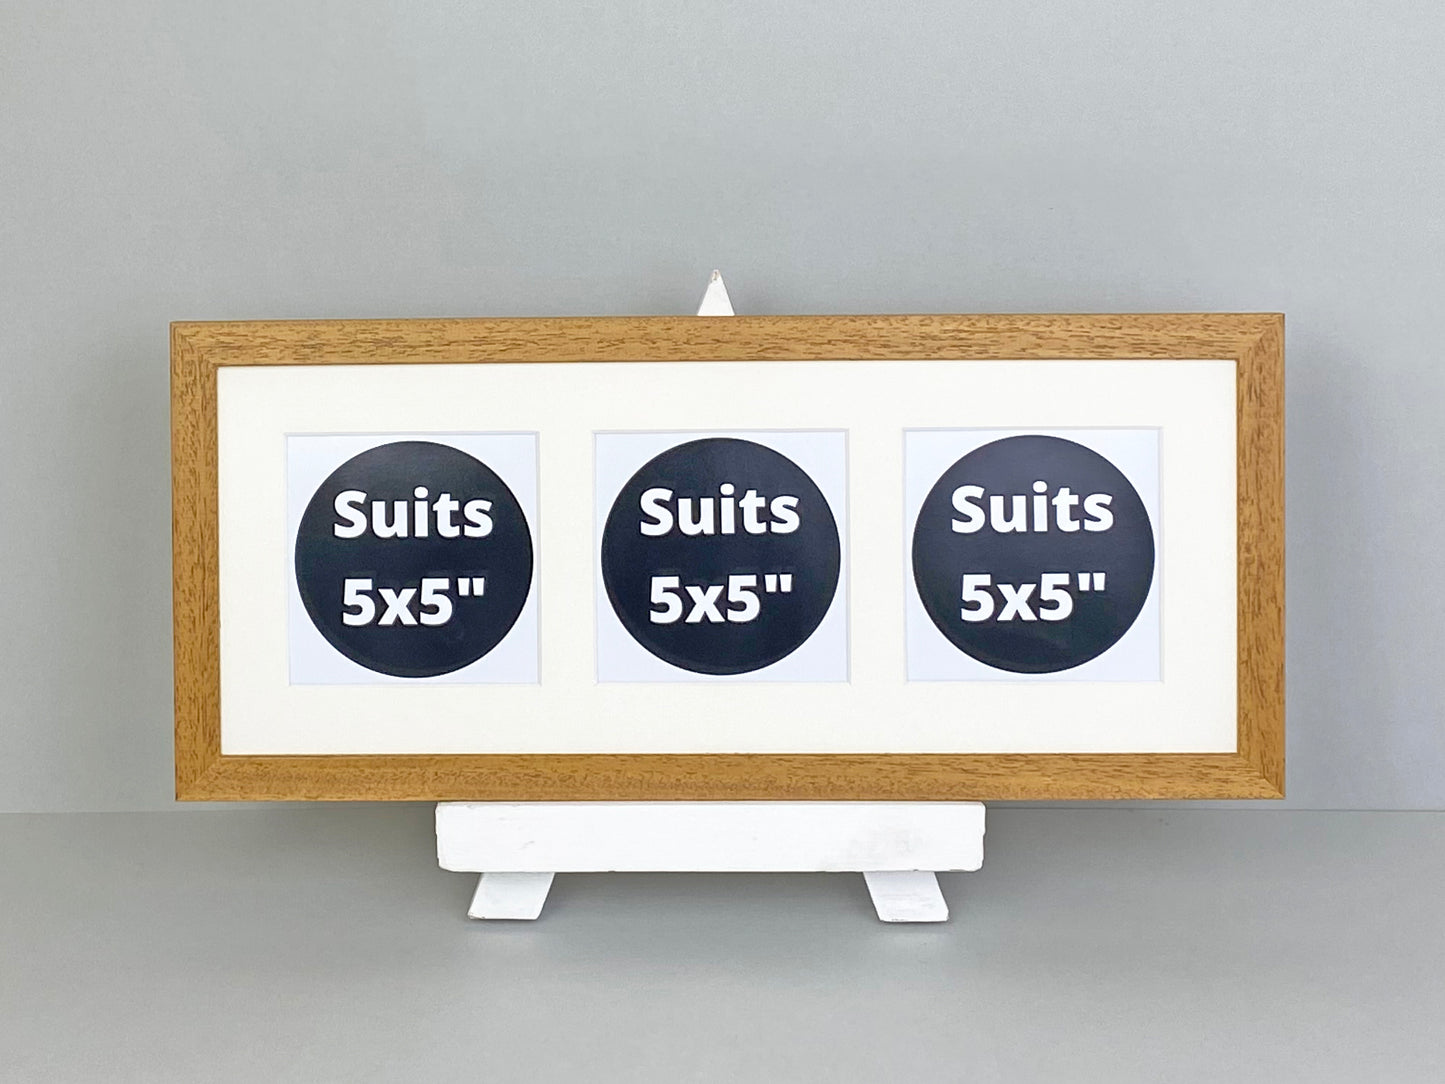 Suits Three 5x5" pictures. 20x50cm. Wooden Multi Aperture Photo Frame.